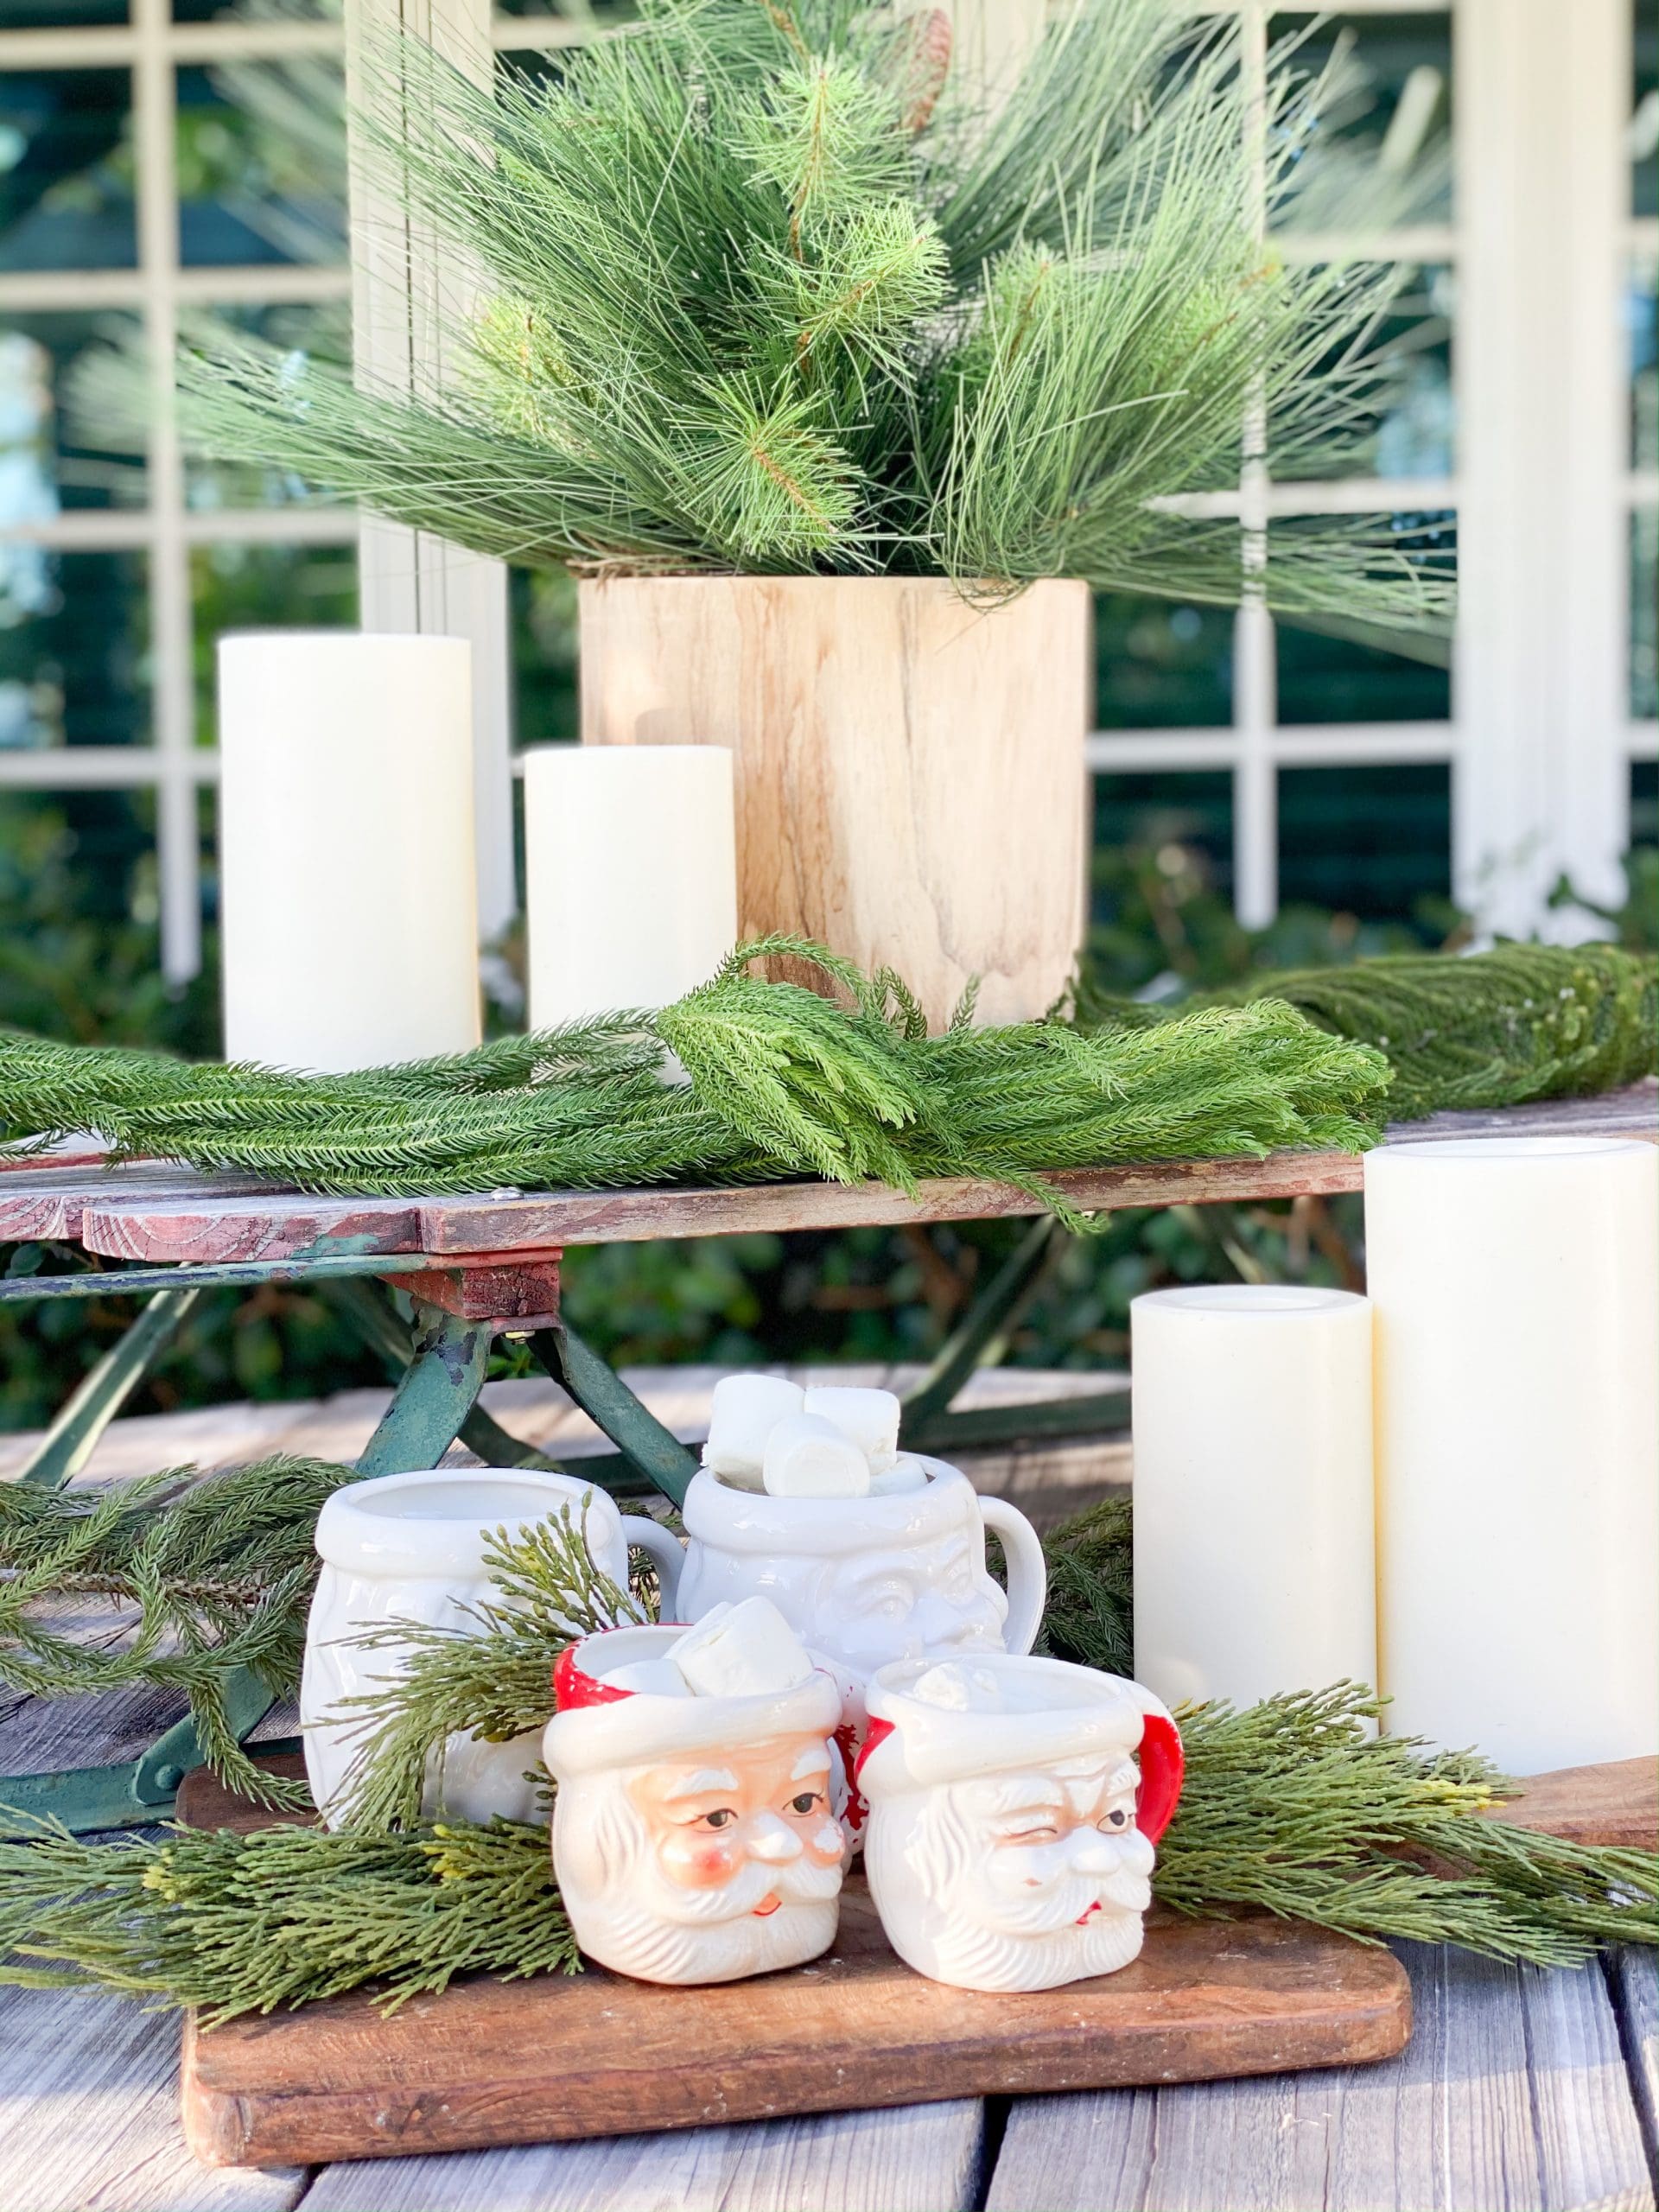 5 Easy and Festive Christmas Front Porch Ideas 2022